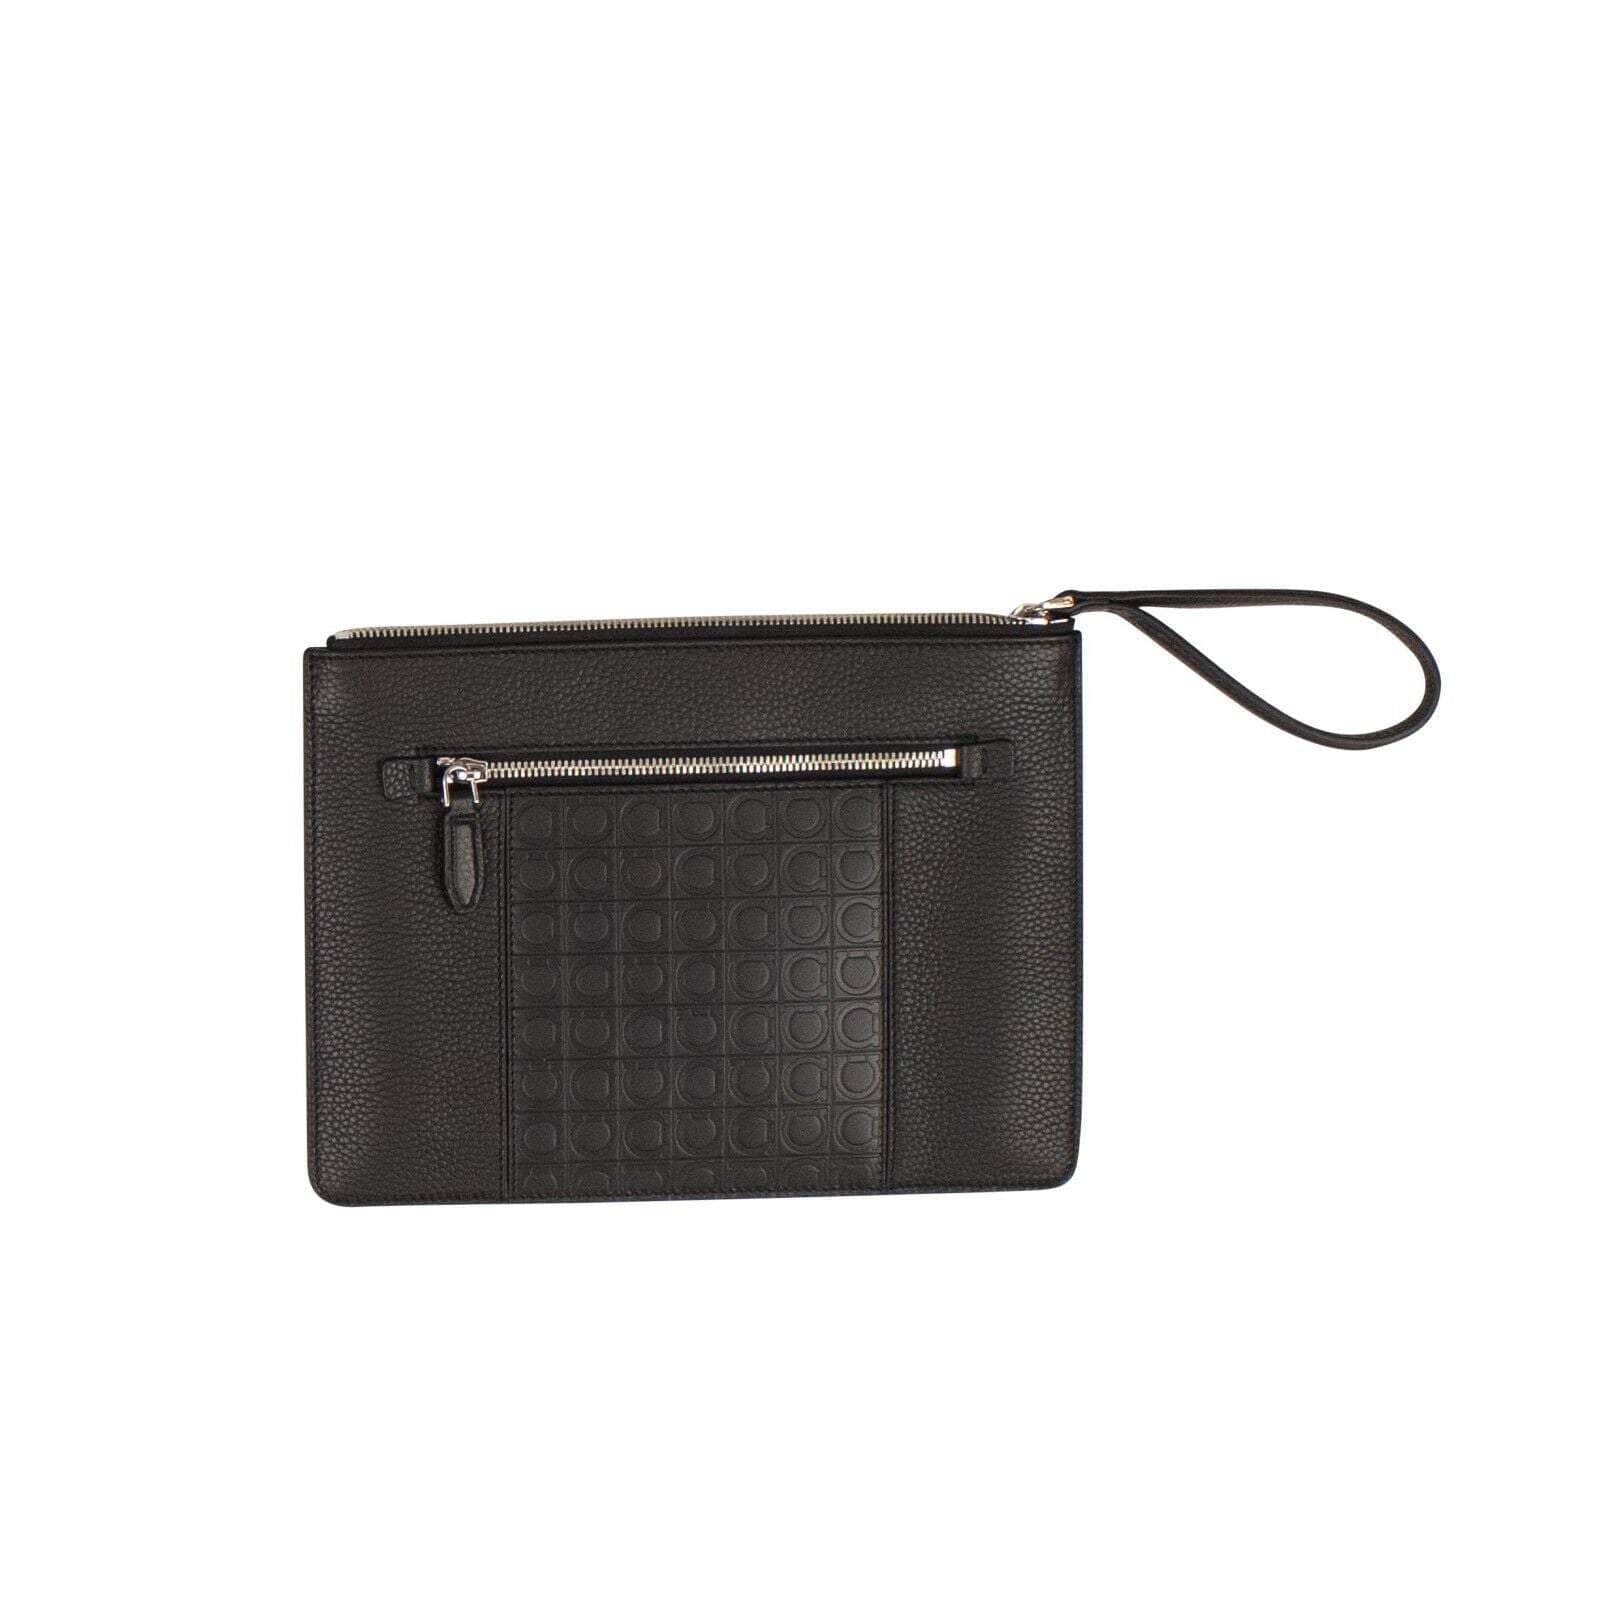 Salvatore Ferragamo 250-500, channelenable-all, chicmi, couponcollection, gender-mens, main-accessories, mens-pouches, mens-shoes, shop375 OS FIRENZE GAMMA EMBOSSED LEATHER POUCH FRG-XACC-0008/OS FRG-XACC-0008/OS